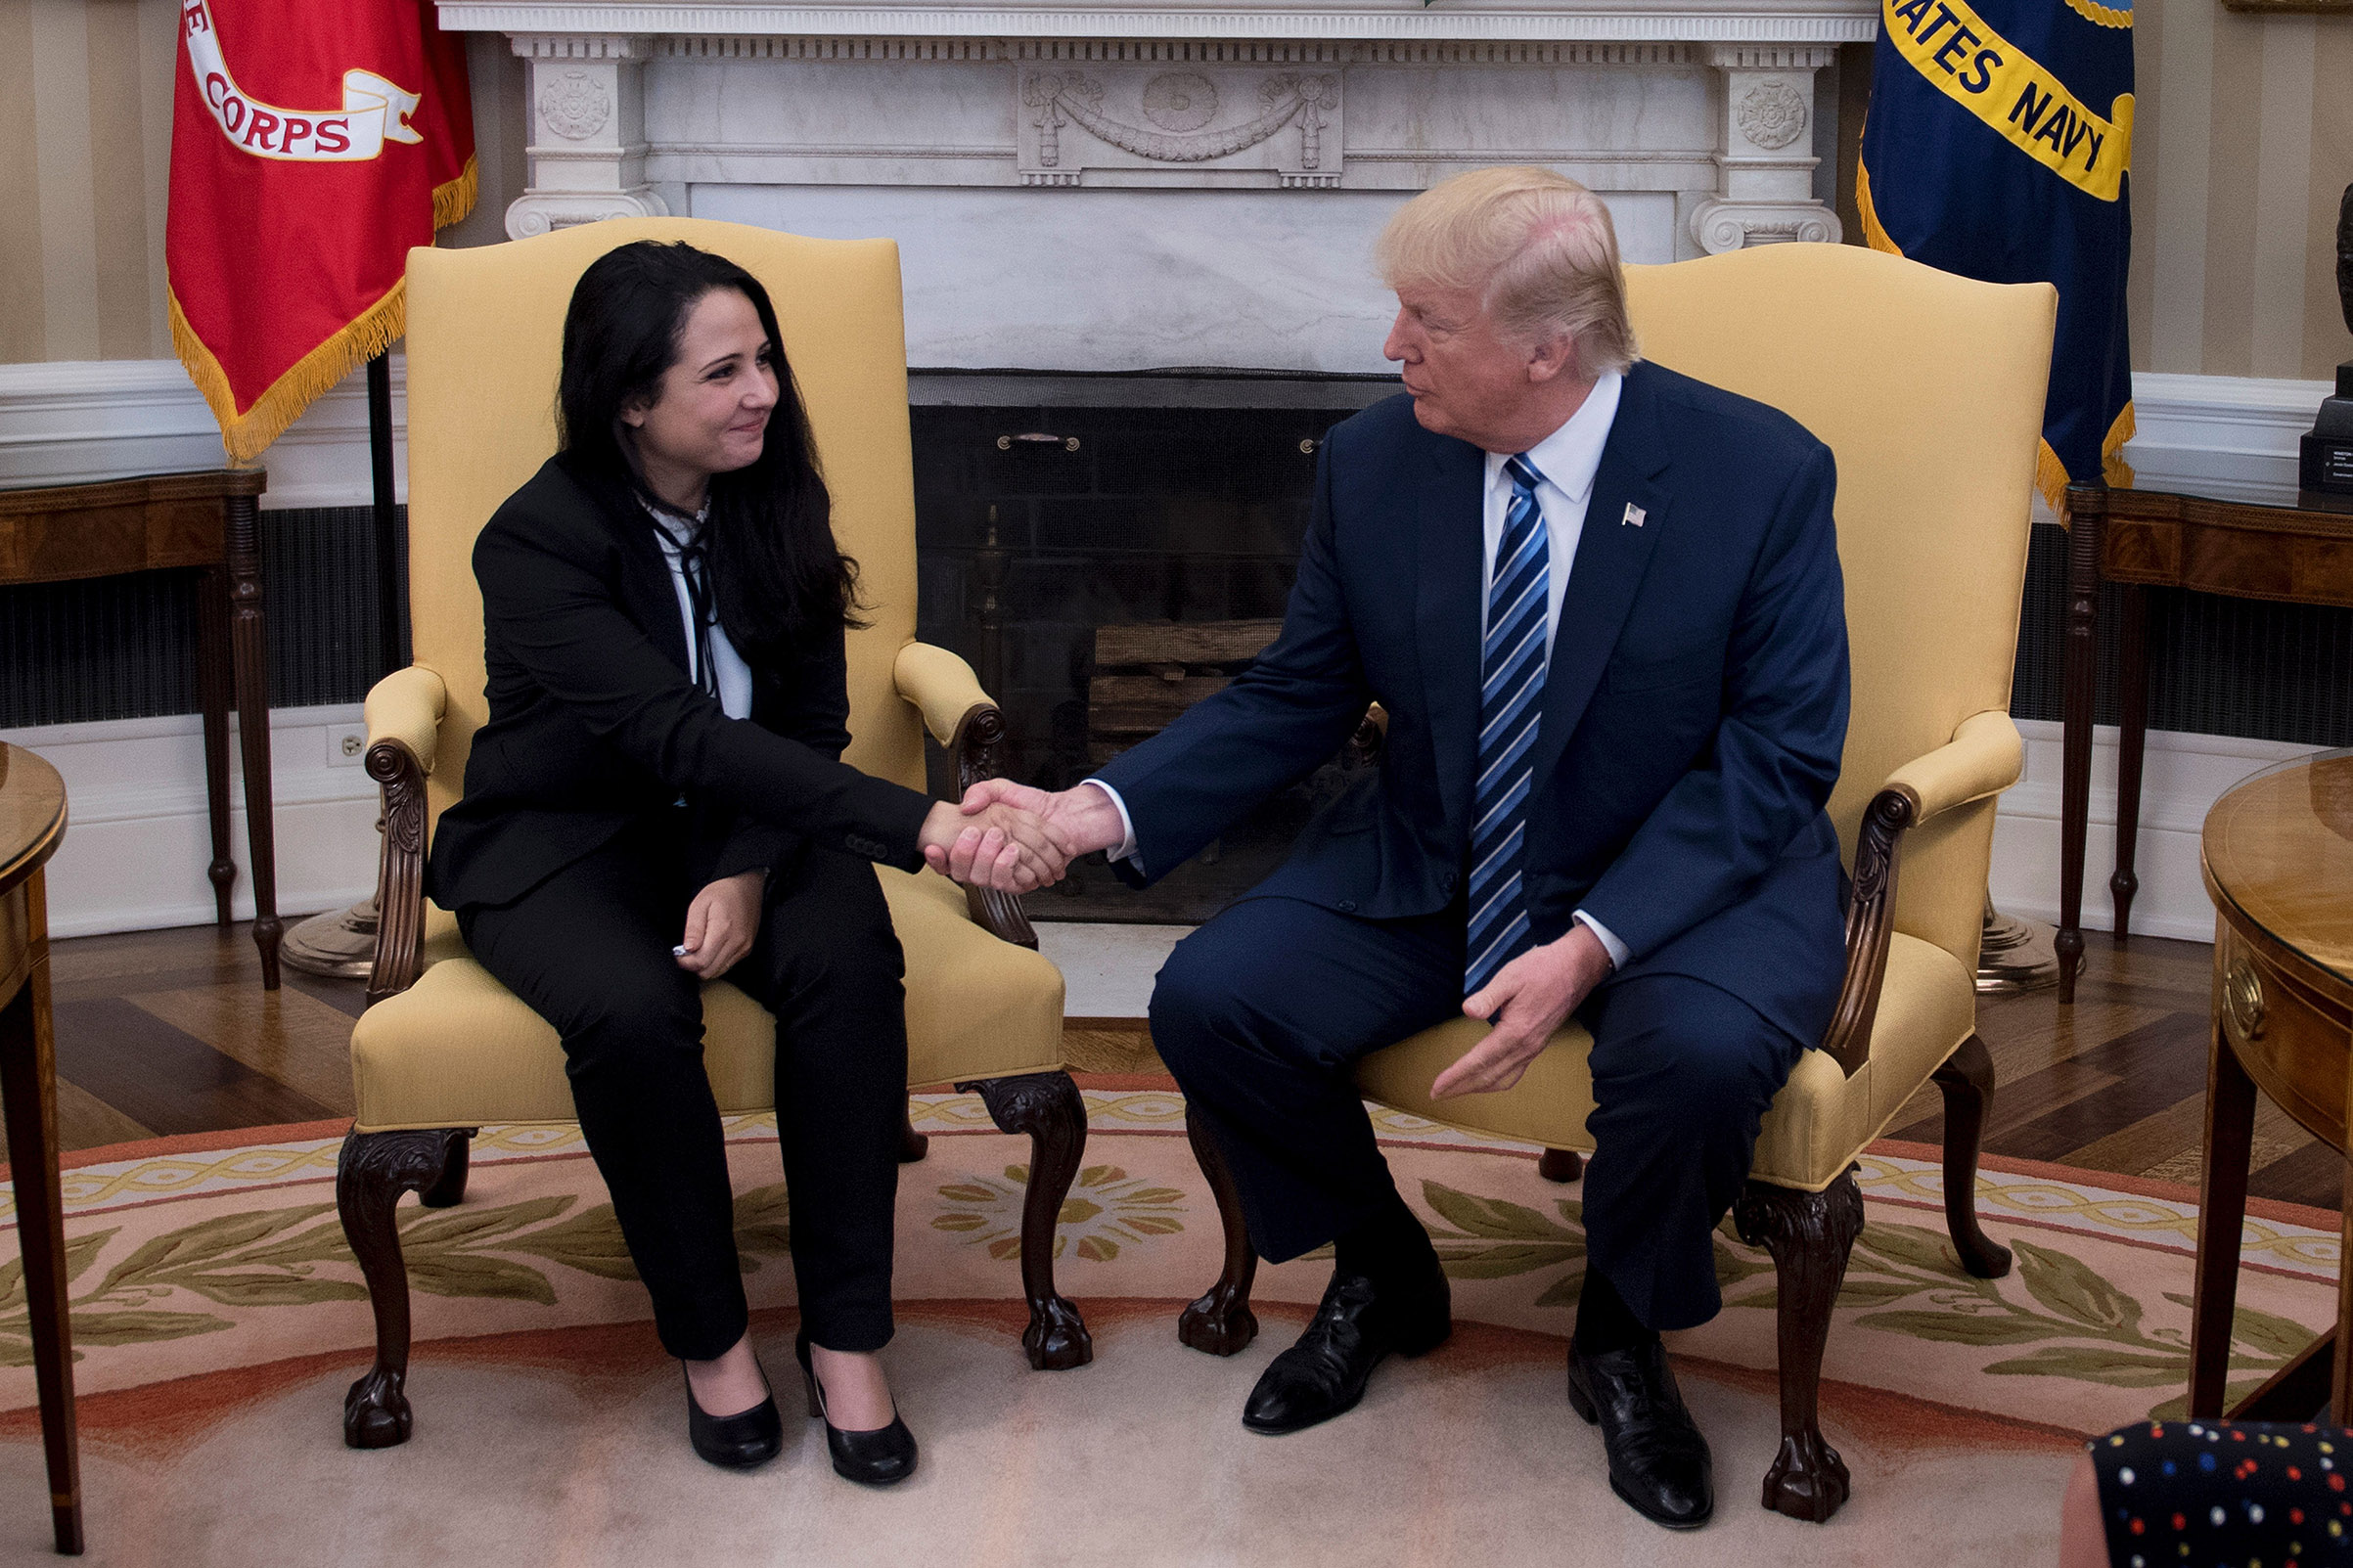 President Donald Trump shakes hands with Aya Hijazi, an Egyptian-American aid worker at the White House in Washington, DC, on April 21, 2017. (Jim Watson—AFP/Getty Images)